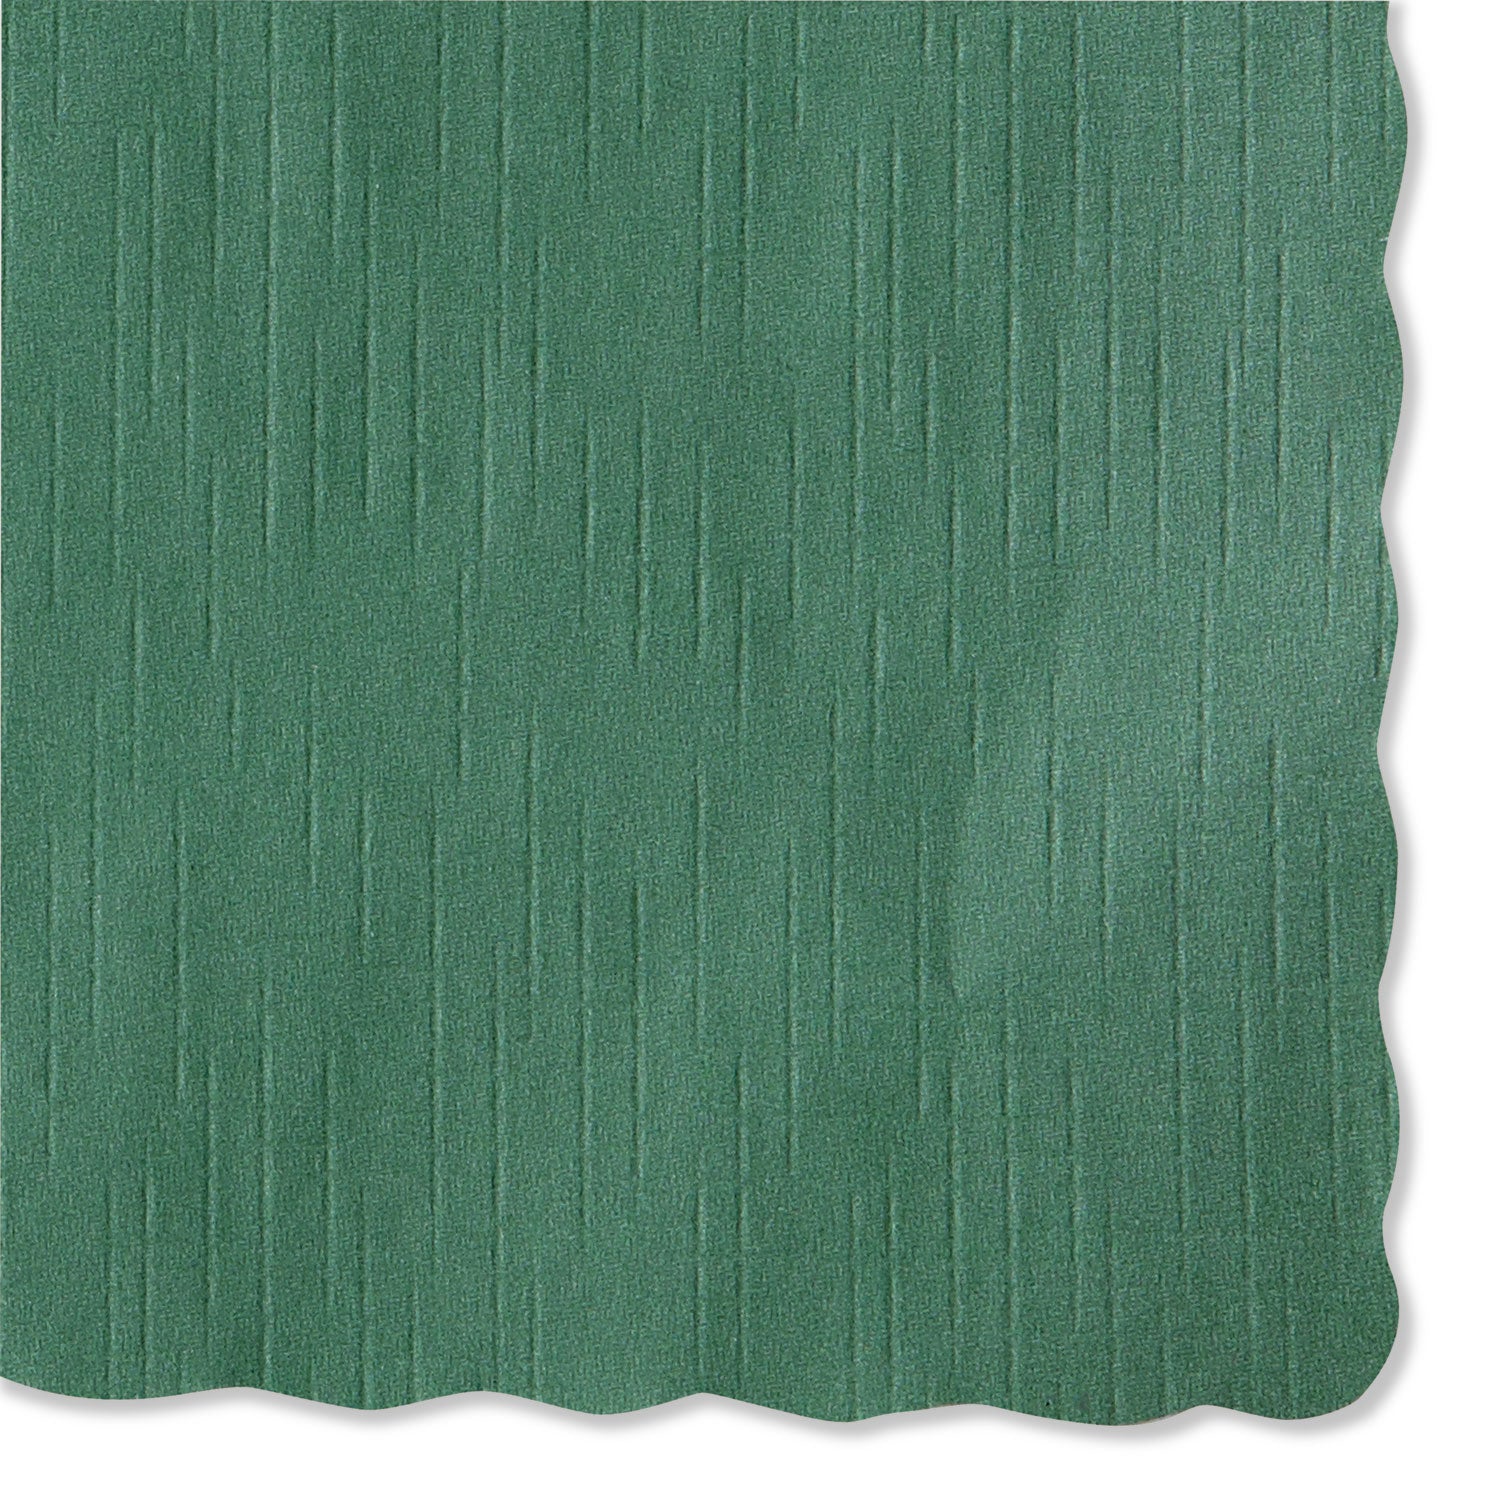 solid-color-scalloped-edge-placemats-95-x-135-hunter-green-1000-carton_hfm310528 - 1